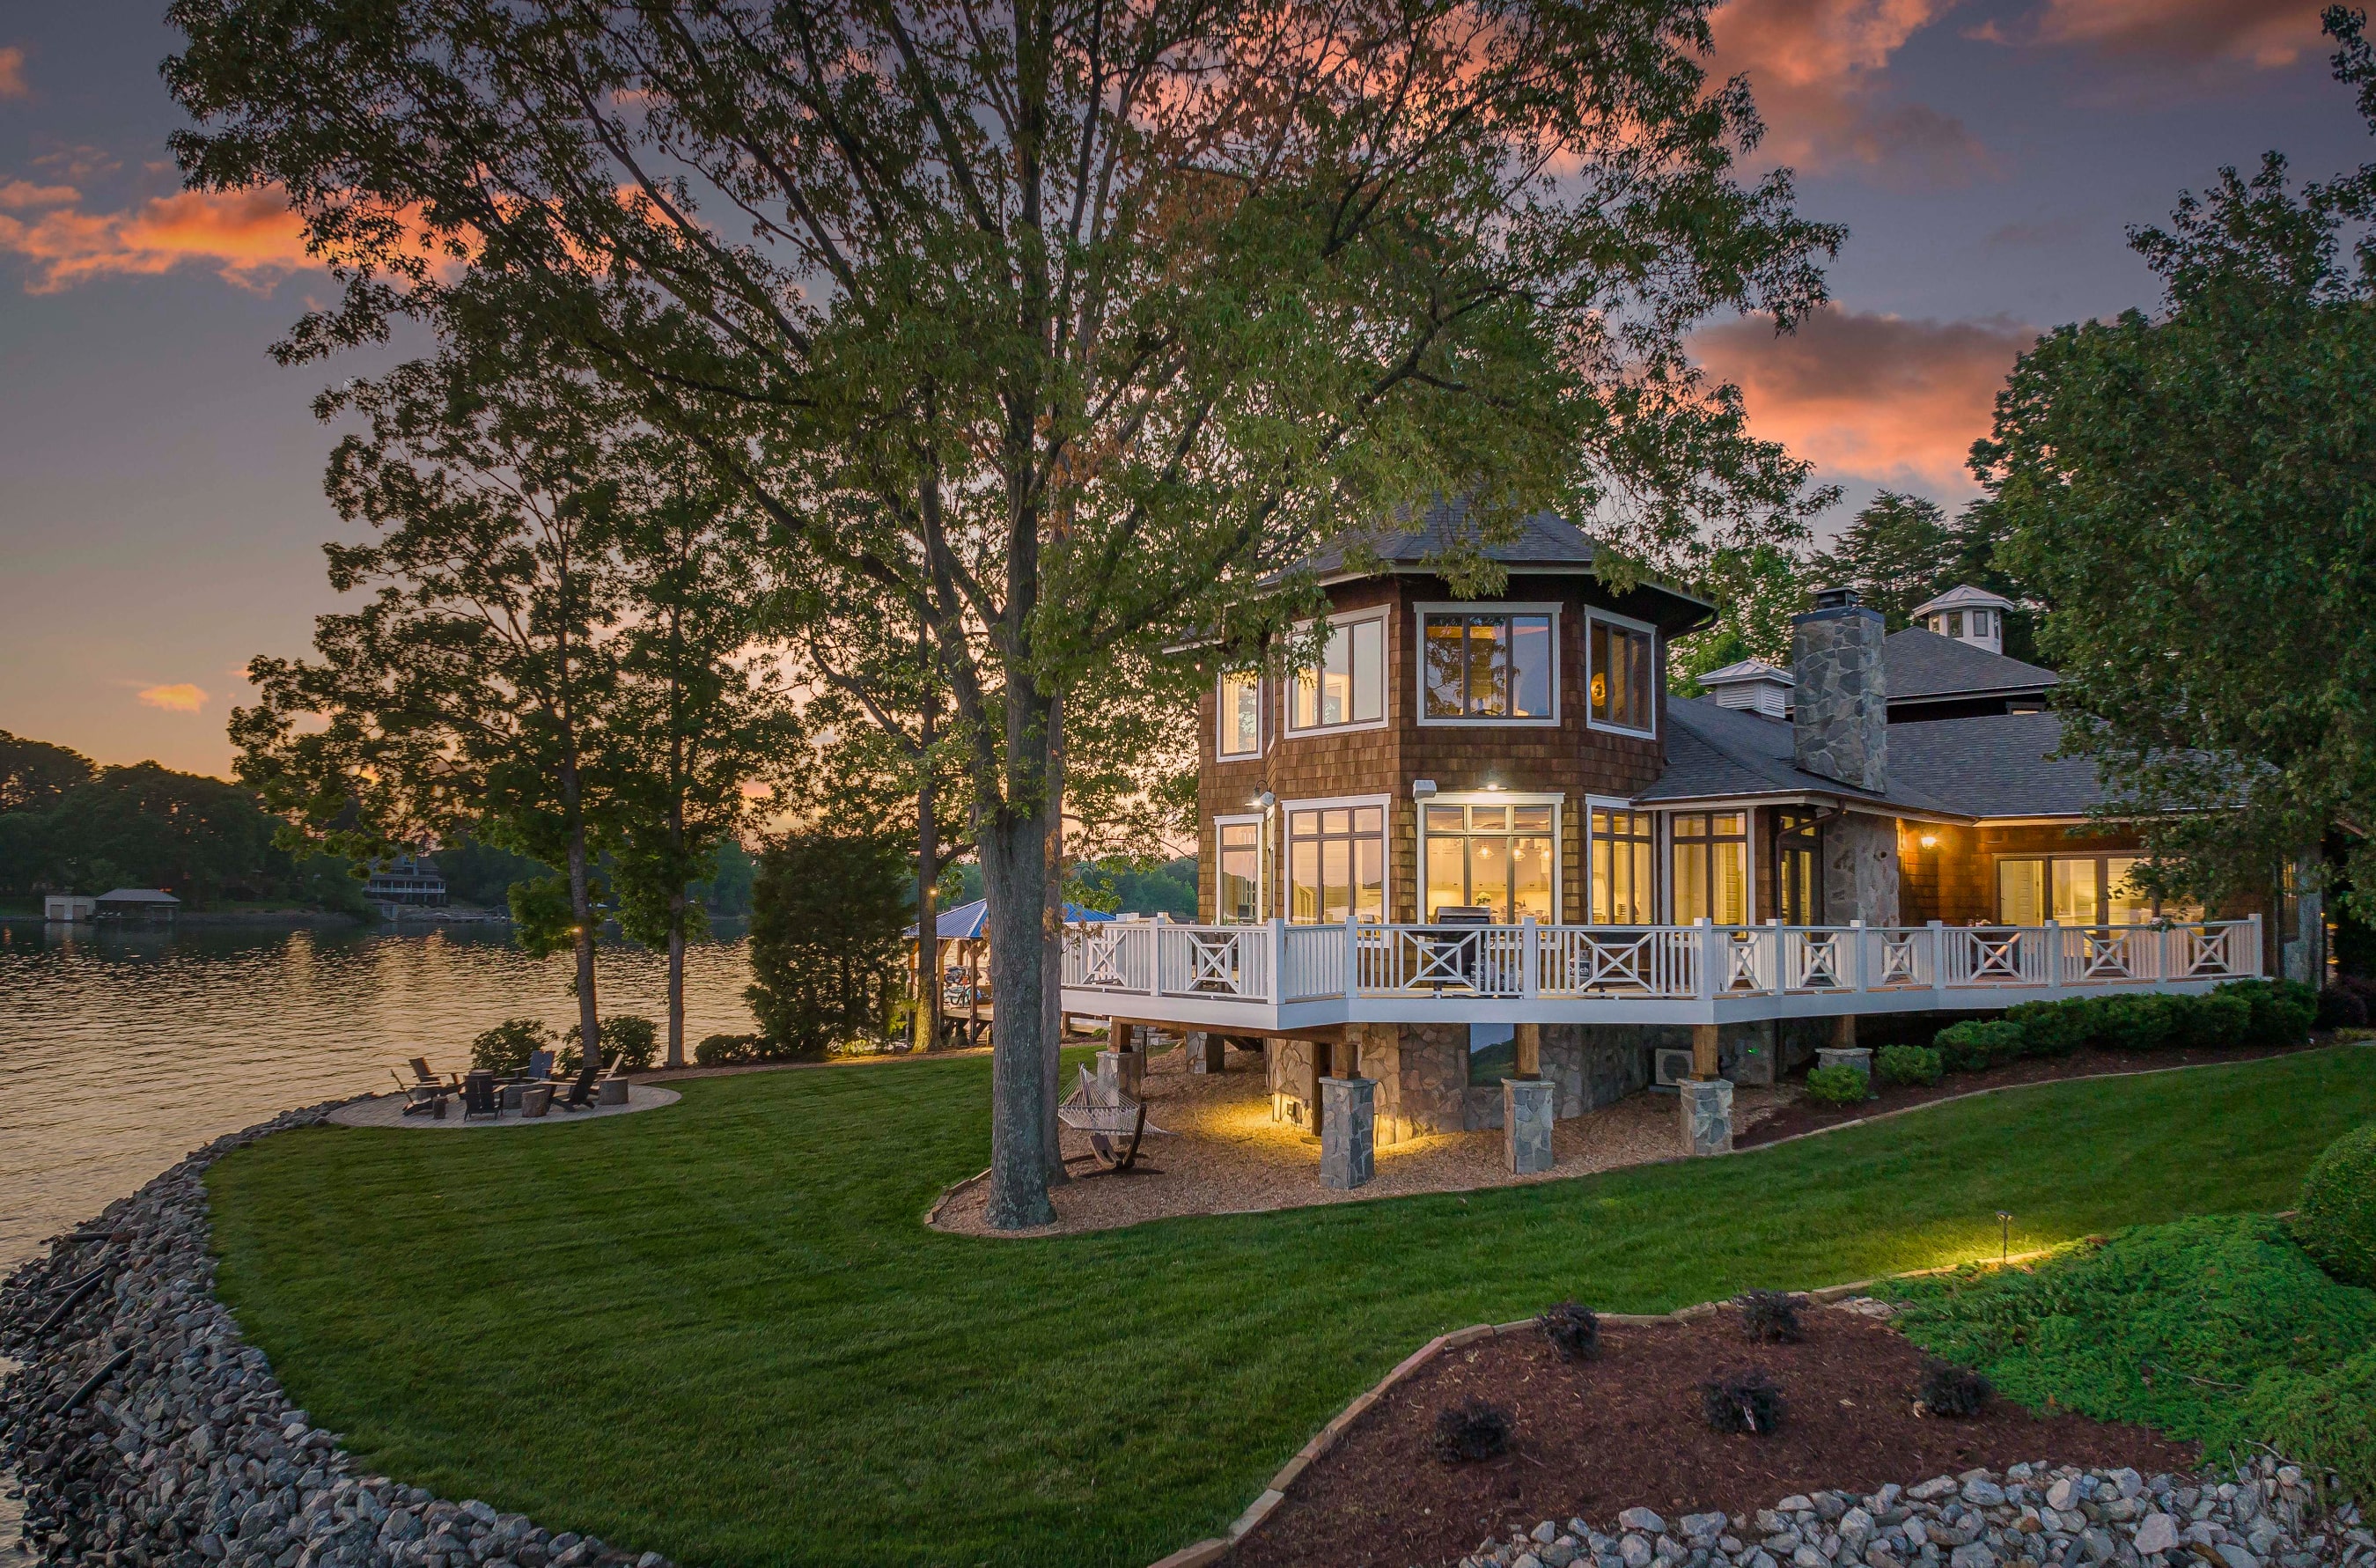 Lake Norman, North Carolina – “Chasestone” sits on a private peninsula with gorgeous lakefront views. The Nanctucket-inspired home comes with a theater room, gourmet kitchen, and deck.